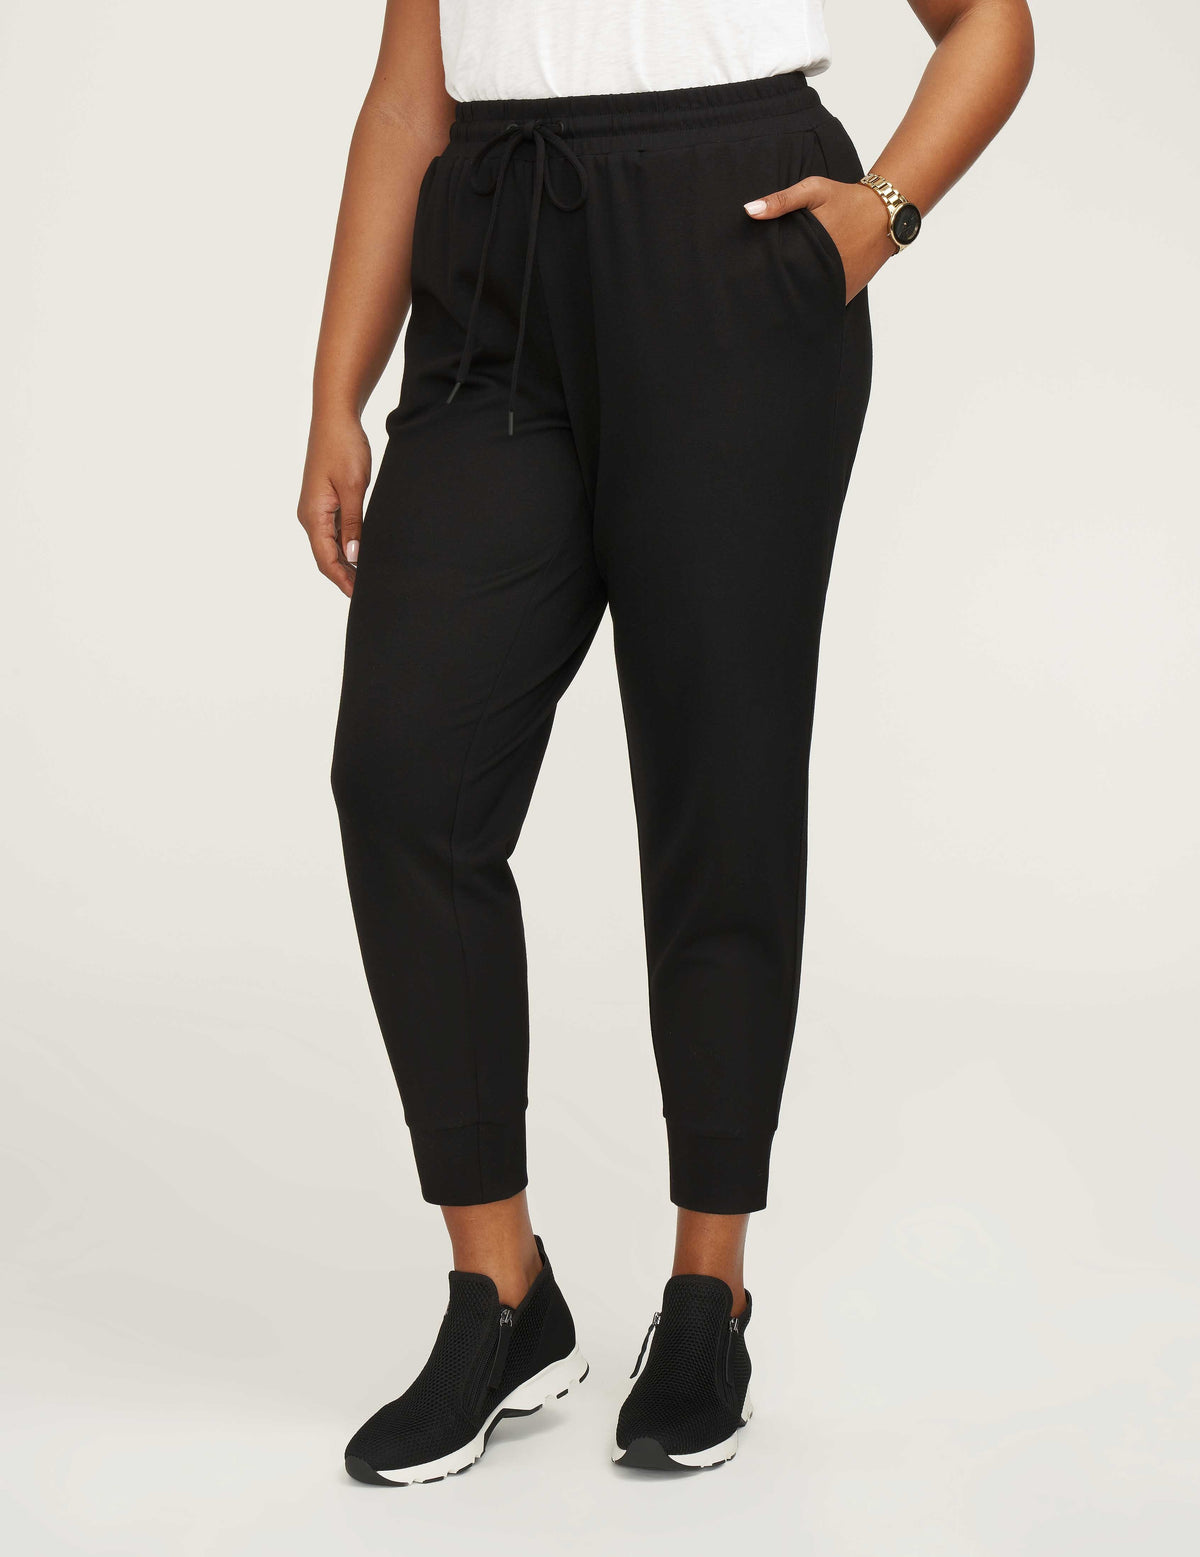 Plus Size Serenity Knit Pull-On Jogger